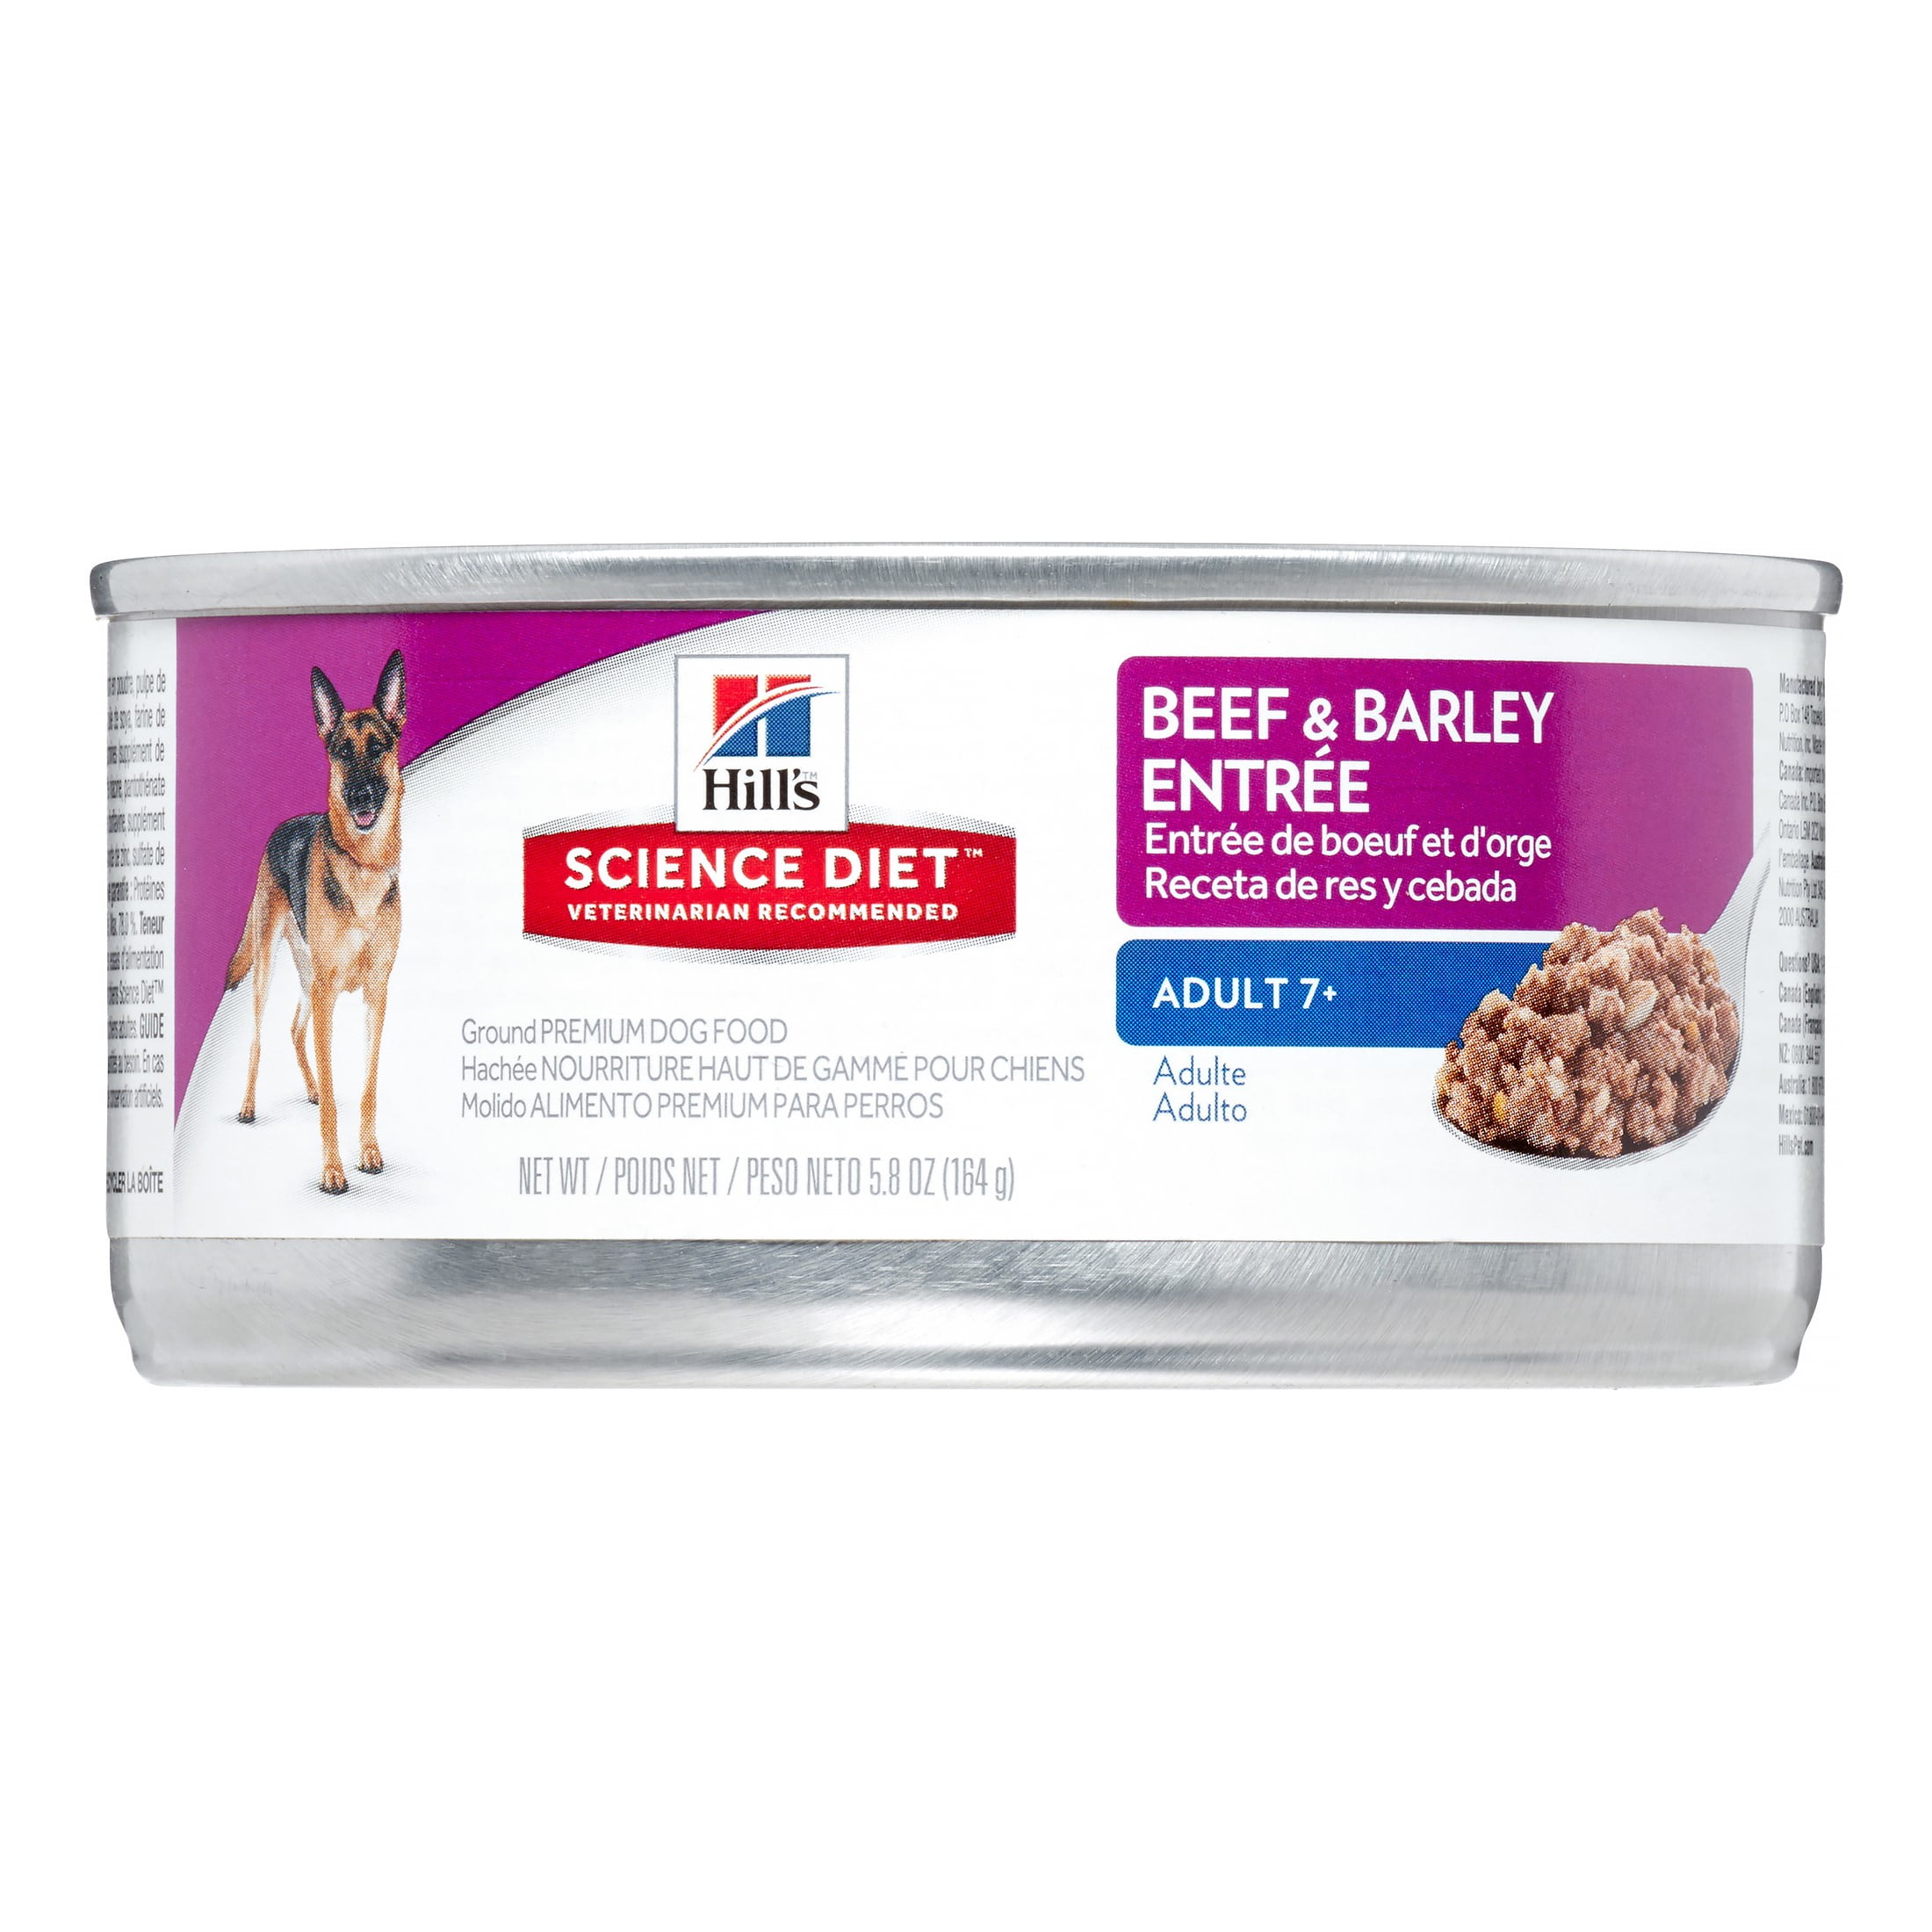 hill's science diet beef and barley entree